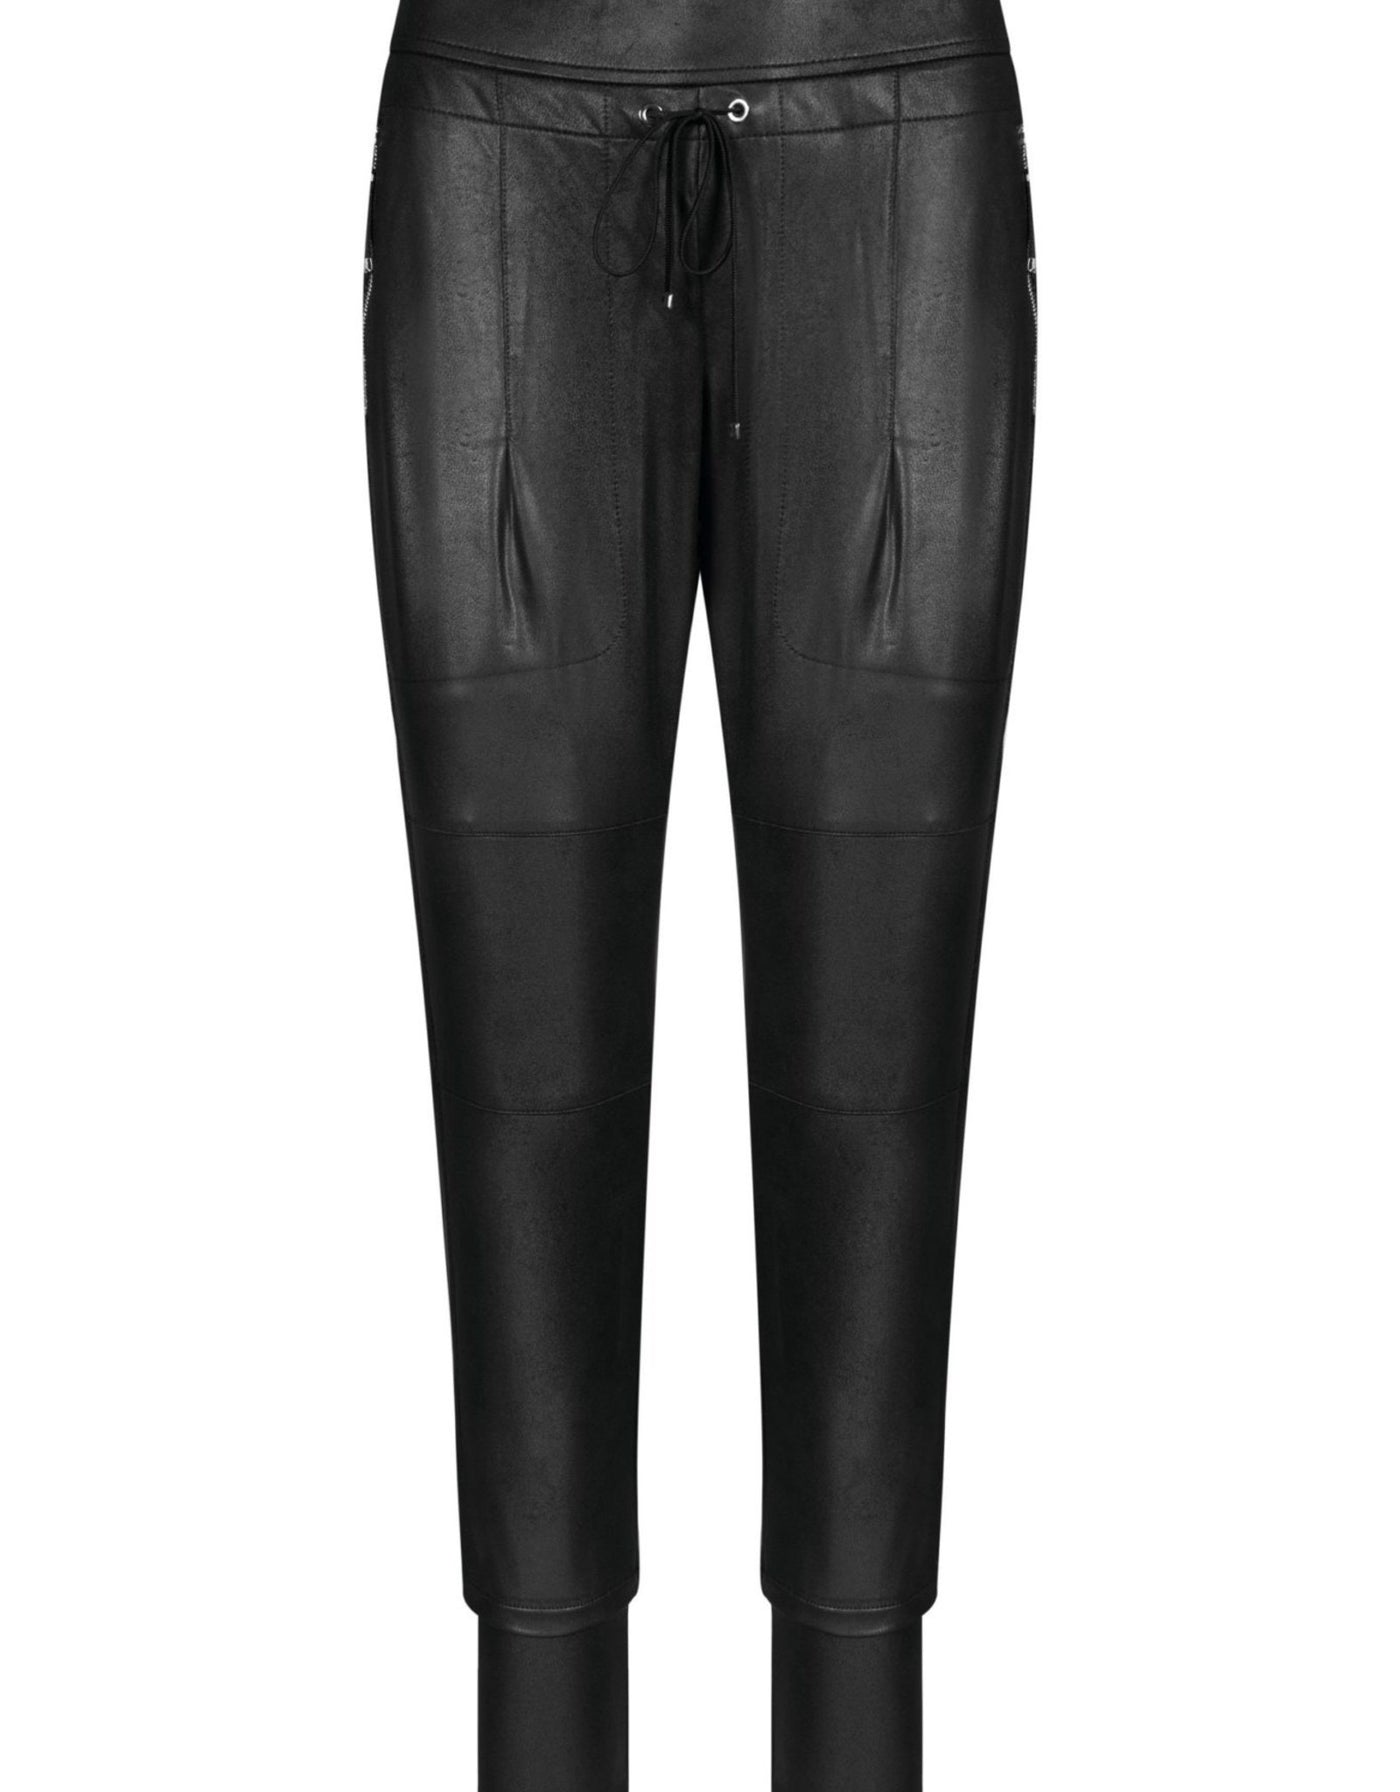 Leather Candy Pant